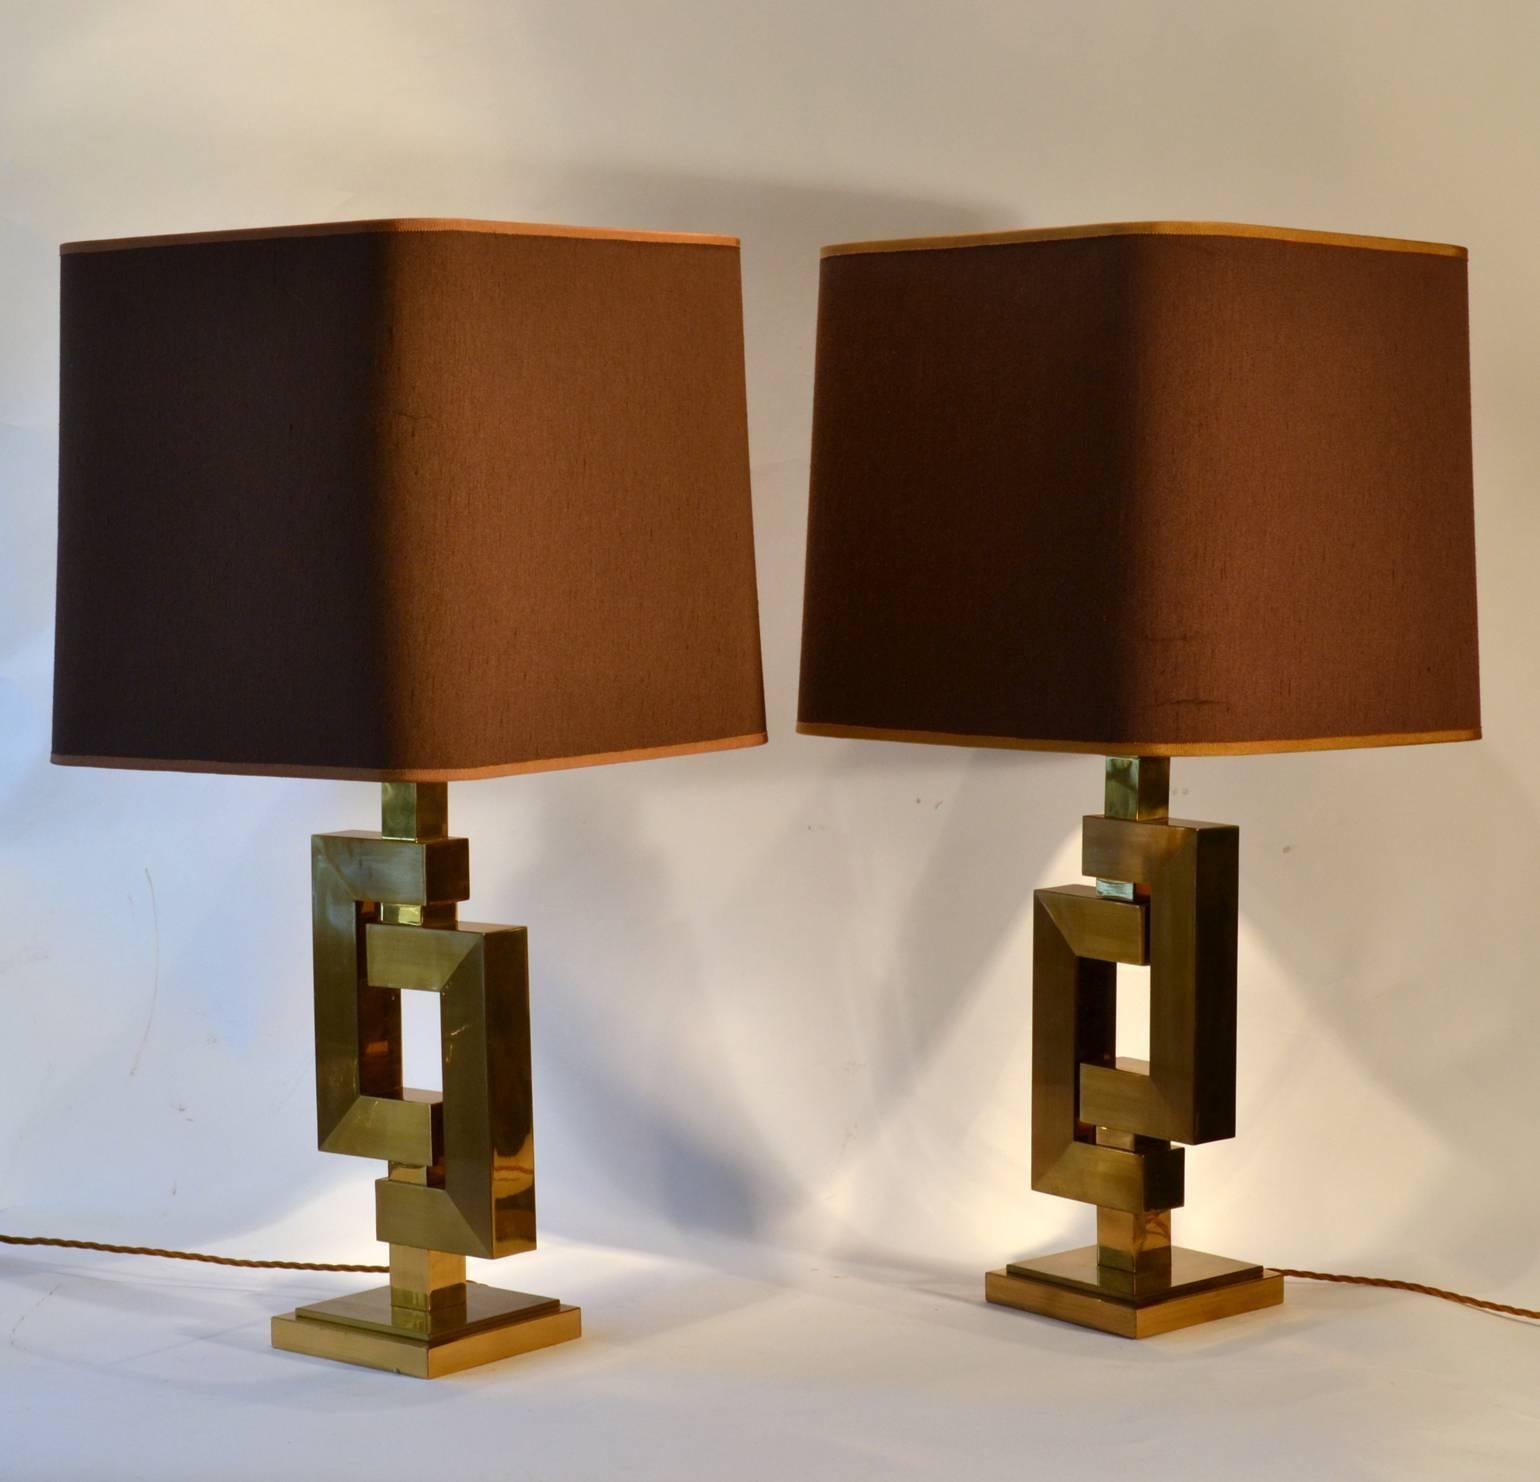 A pair of sculptural table lamps with strong geometric design with square tubular sections in alternating polished and brushed brass finish attributed to Willy Rizzo. The lamps are in excellent condition. The shades are original brown and gold with